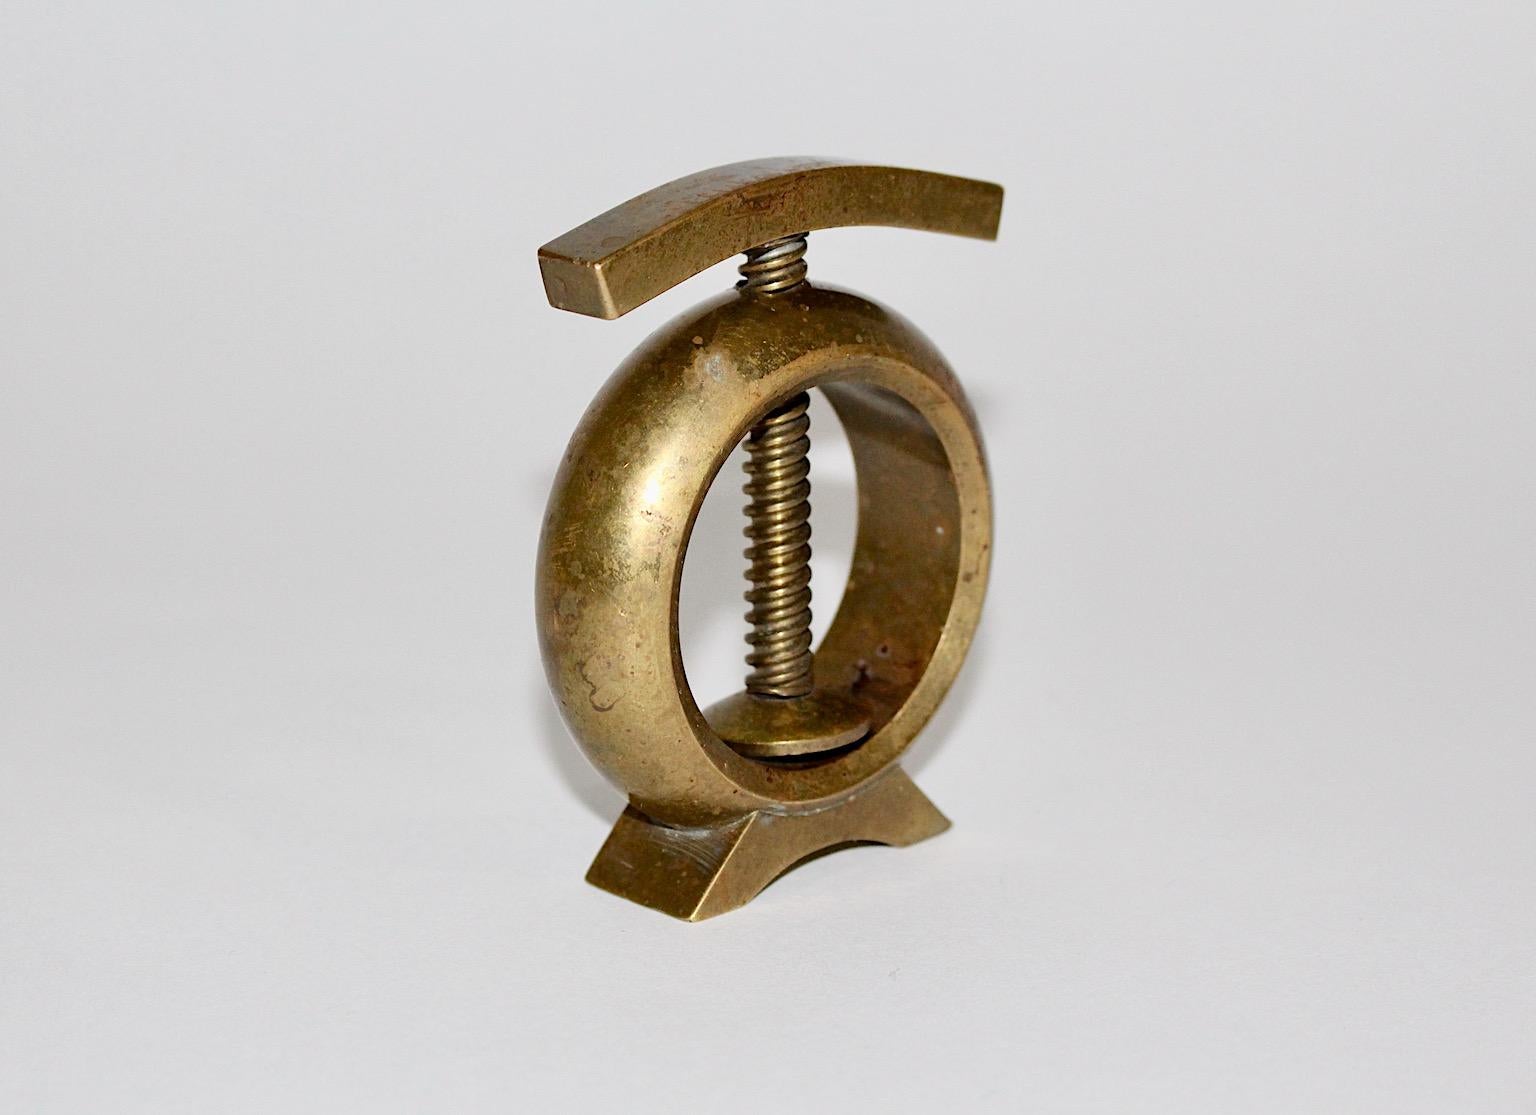 Mid Century Modern vintage nut cracker from solid brass designed and executed Austria 1950s.
Amazing simple design in great execution highlights this nut cracker.
Very rare to find such an amazing design piece in its in the original paper case.